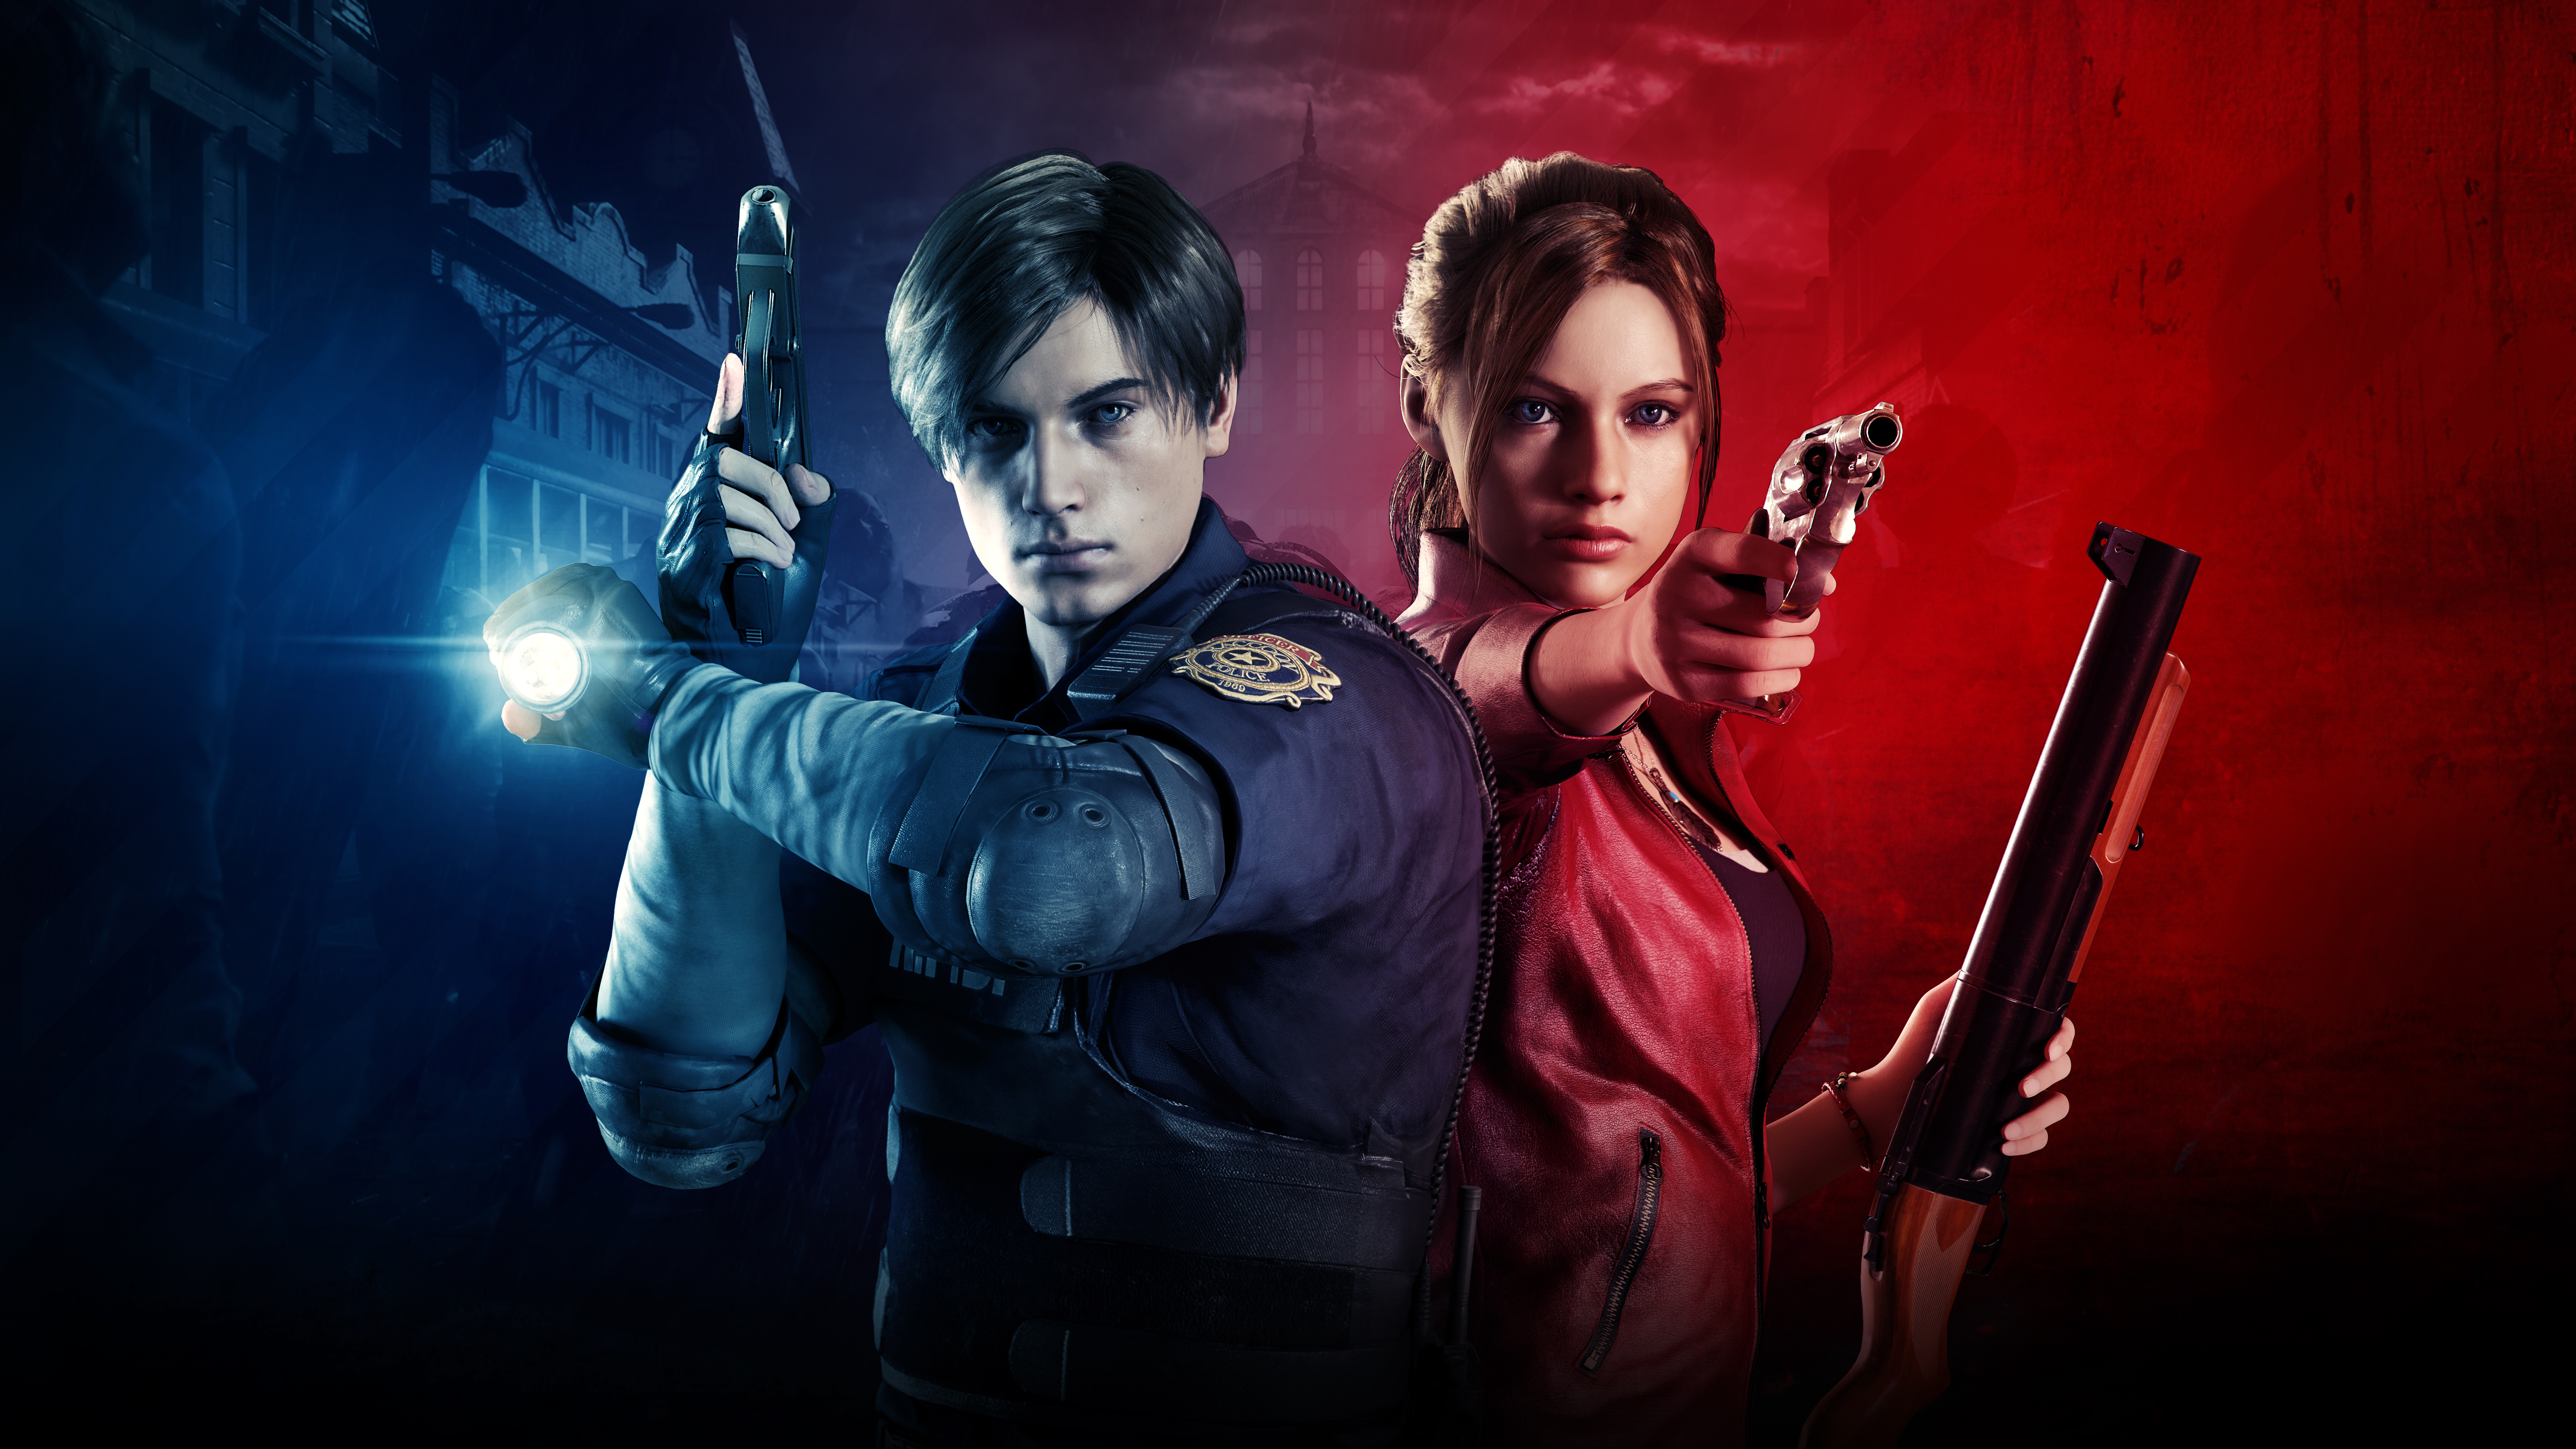 resident evil, video game, resident evil 2 (2019), claire redfield, leon s kennedy